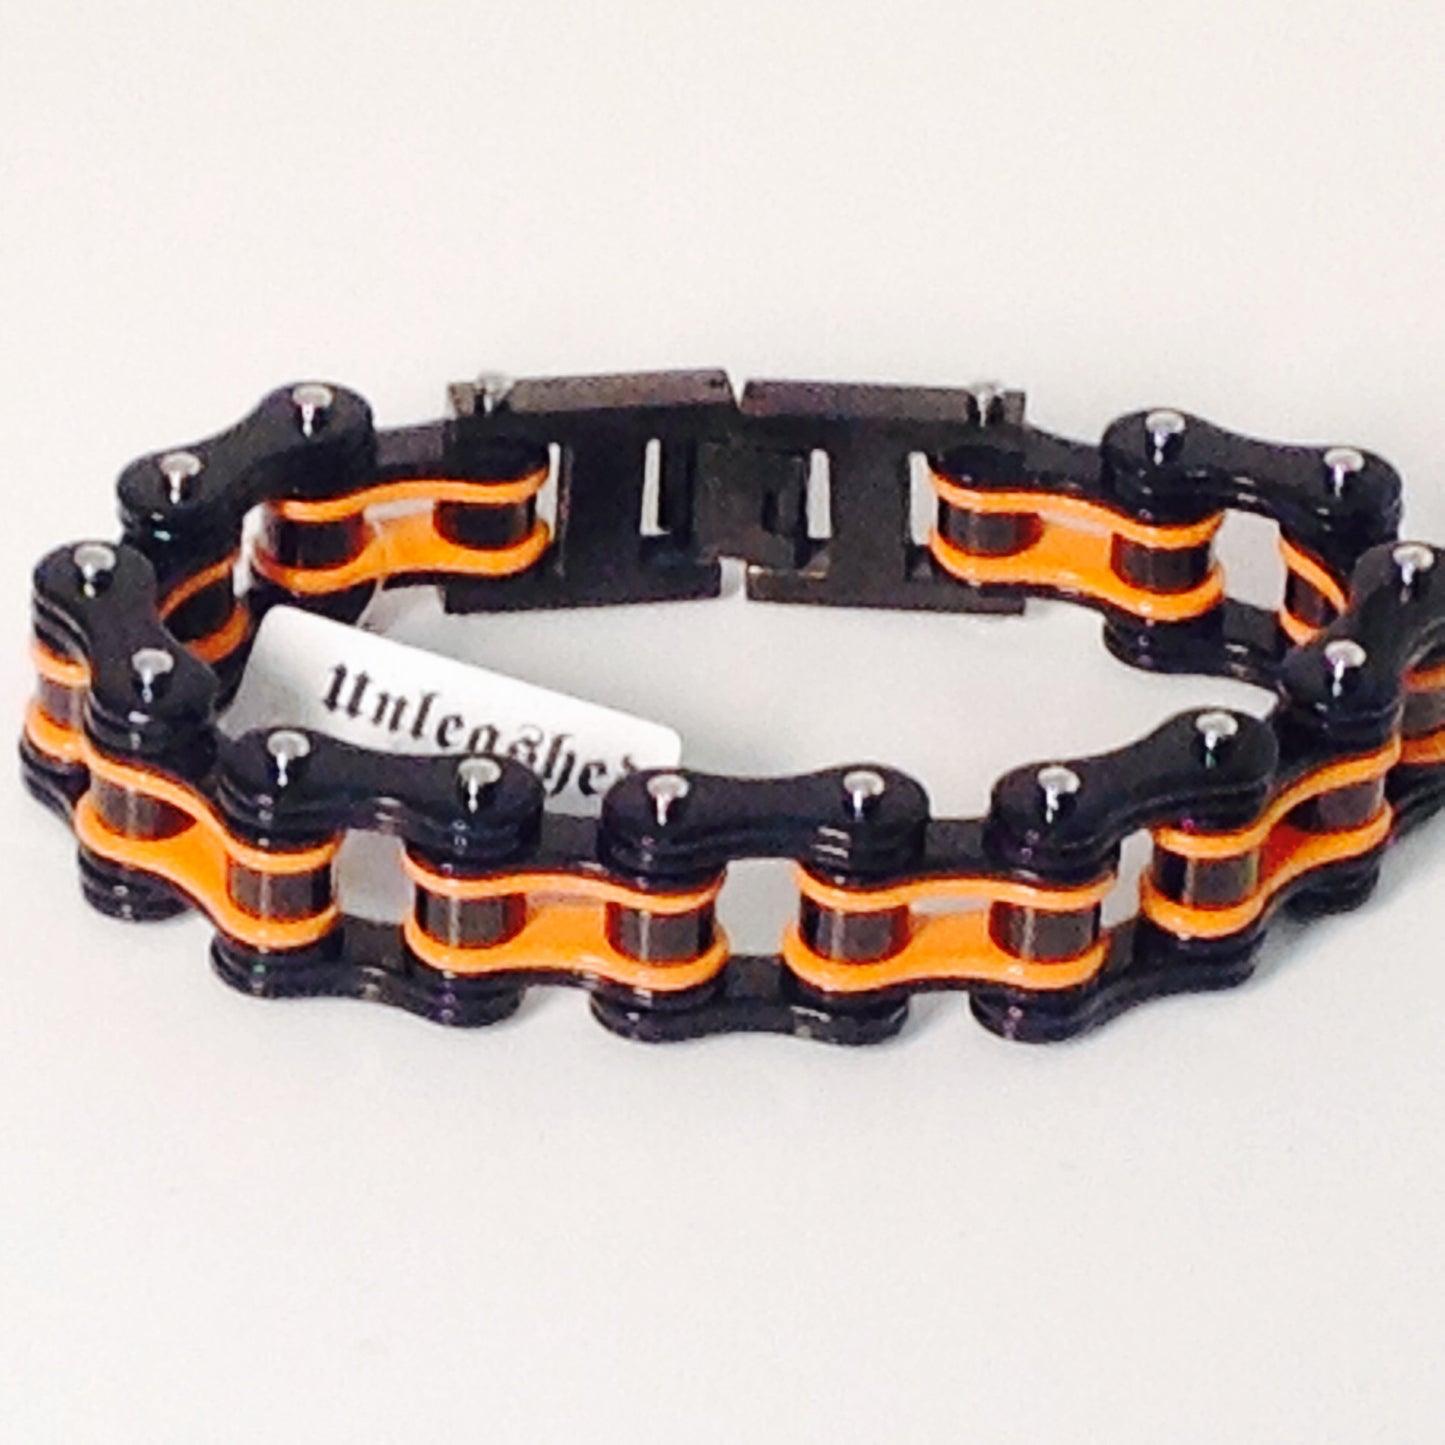 Stainless Steel Bike Chain 3/4 Black and Orange - Unleashed Jewelry